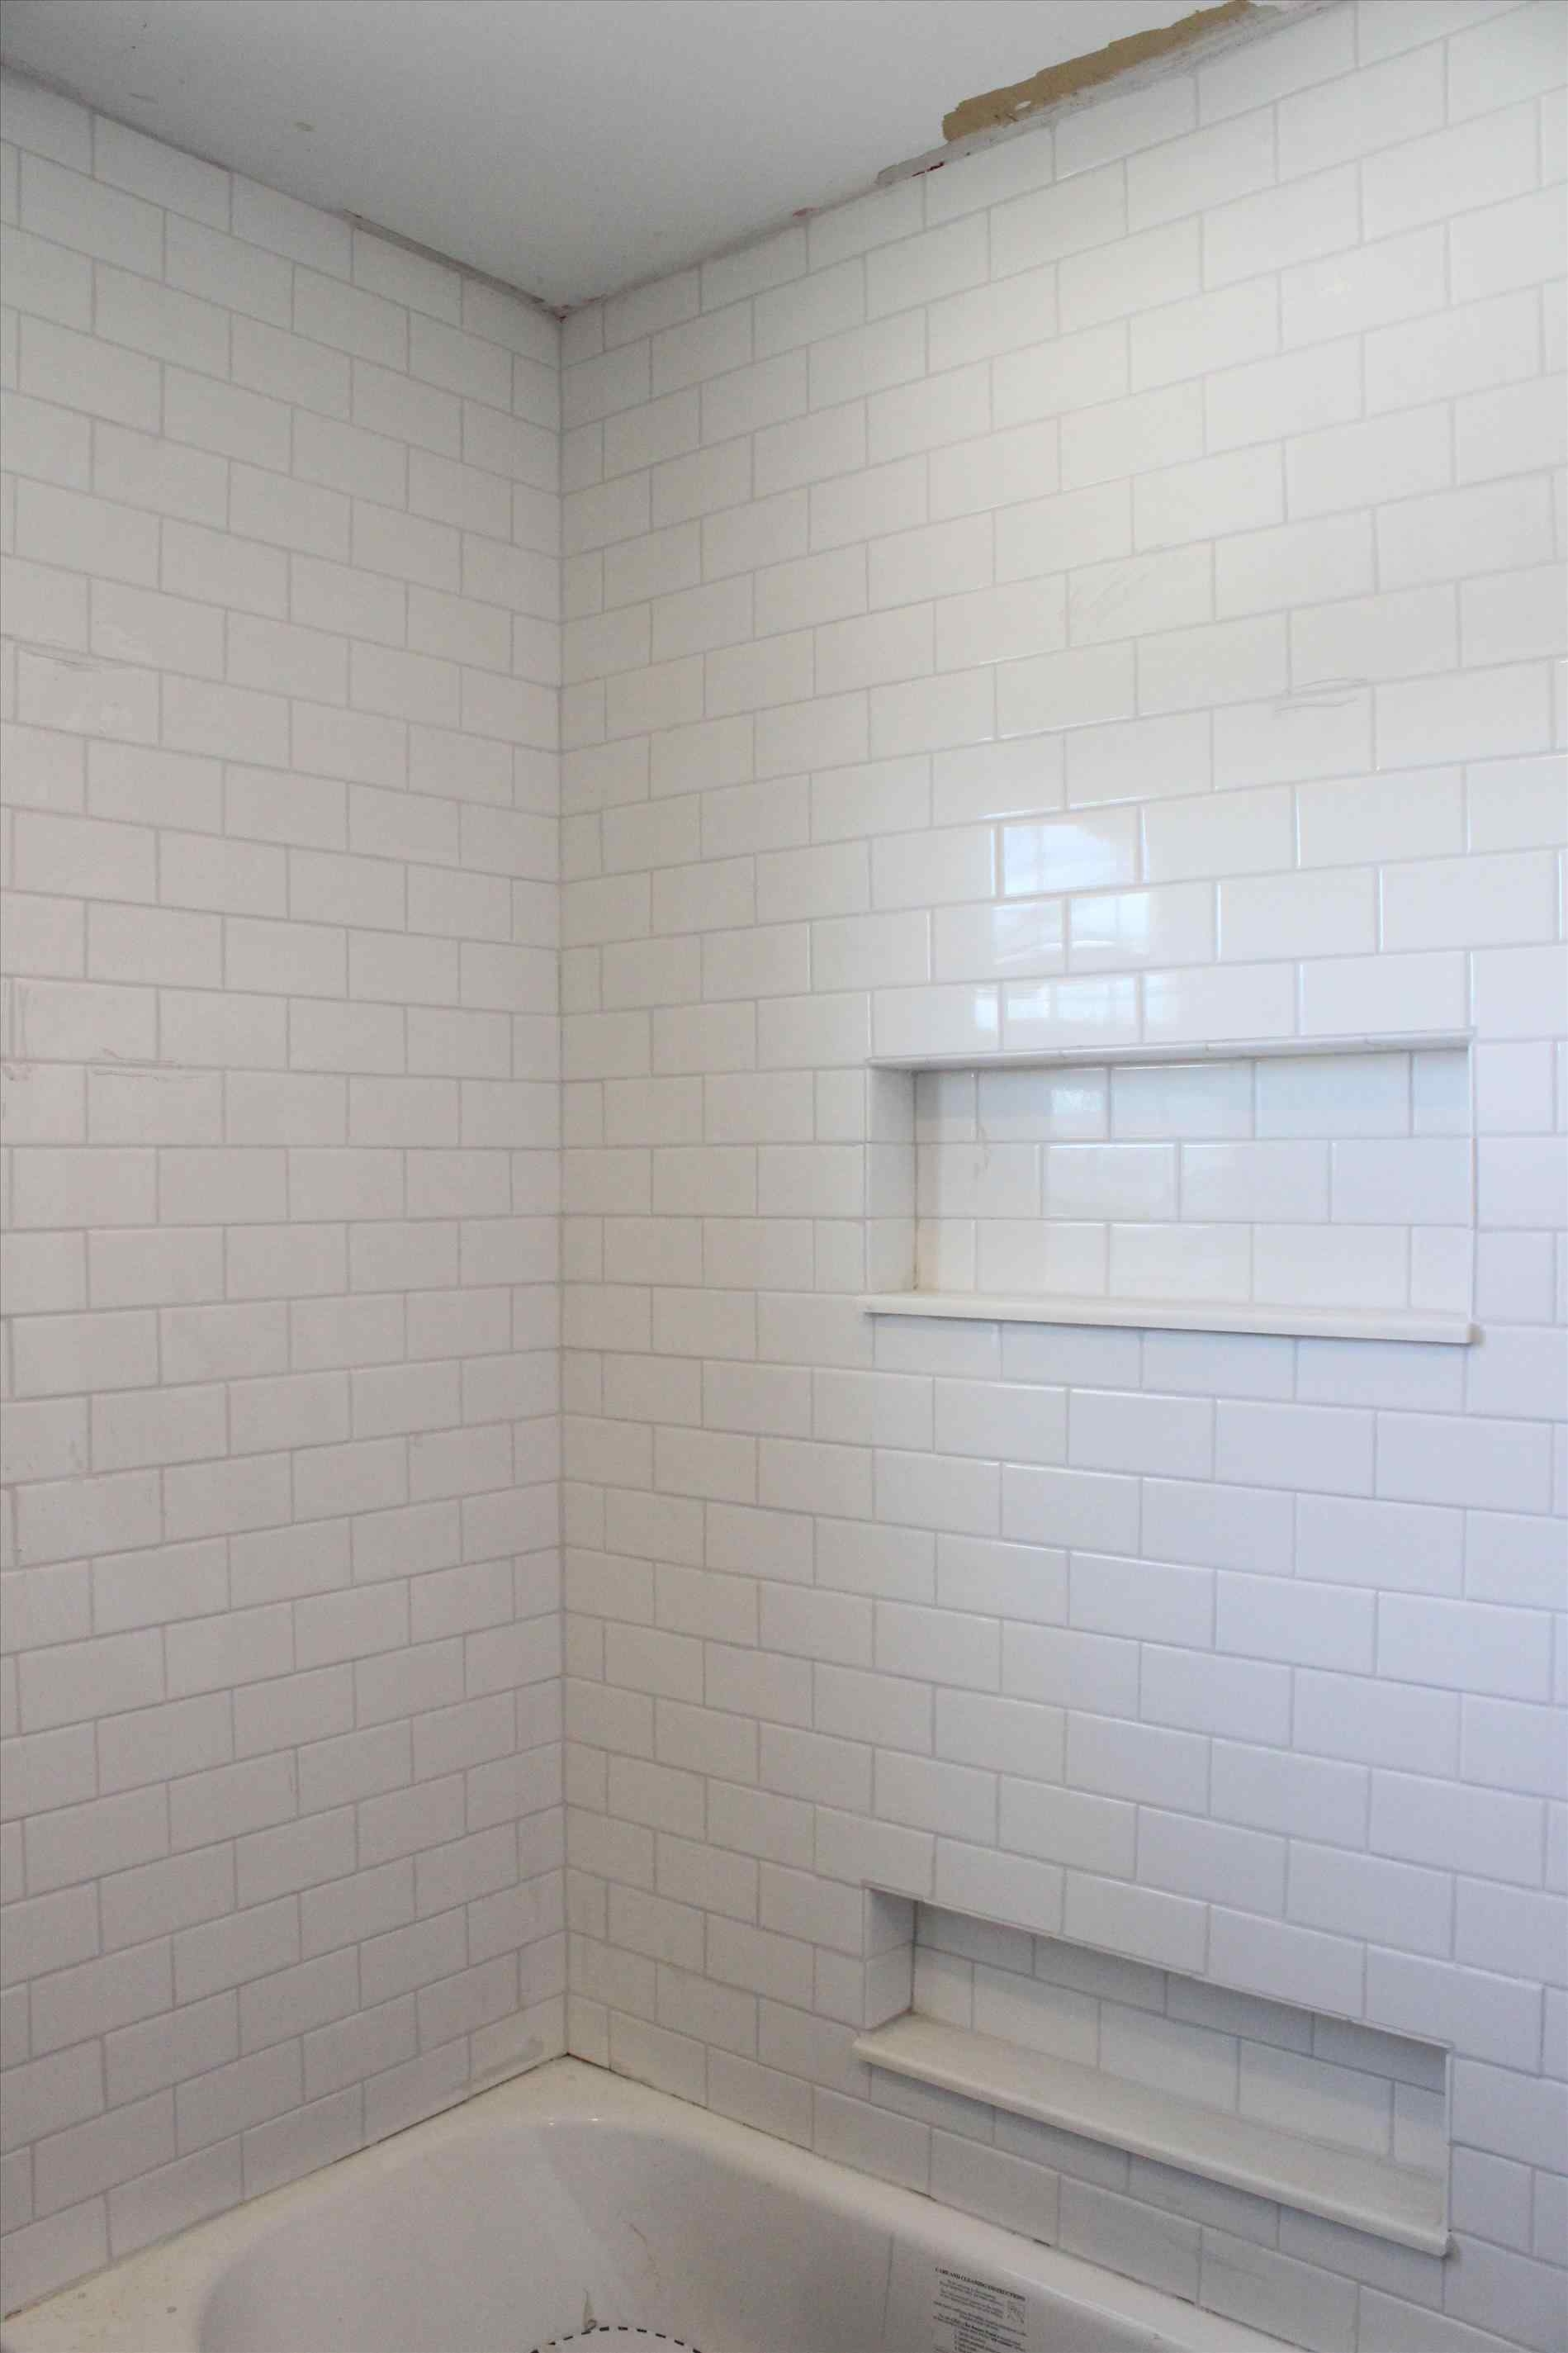 Subway Tile On Ceiling